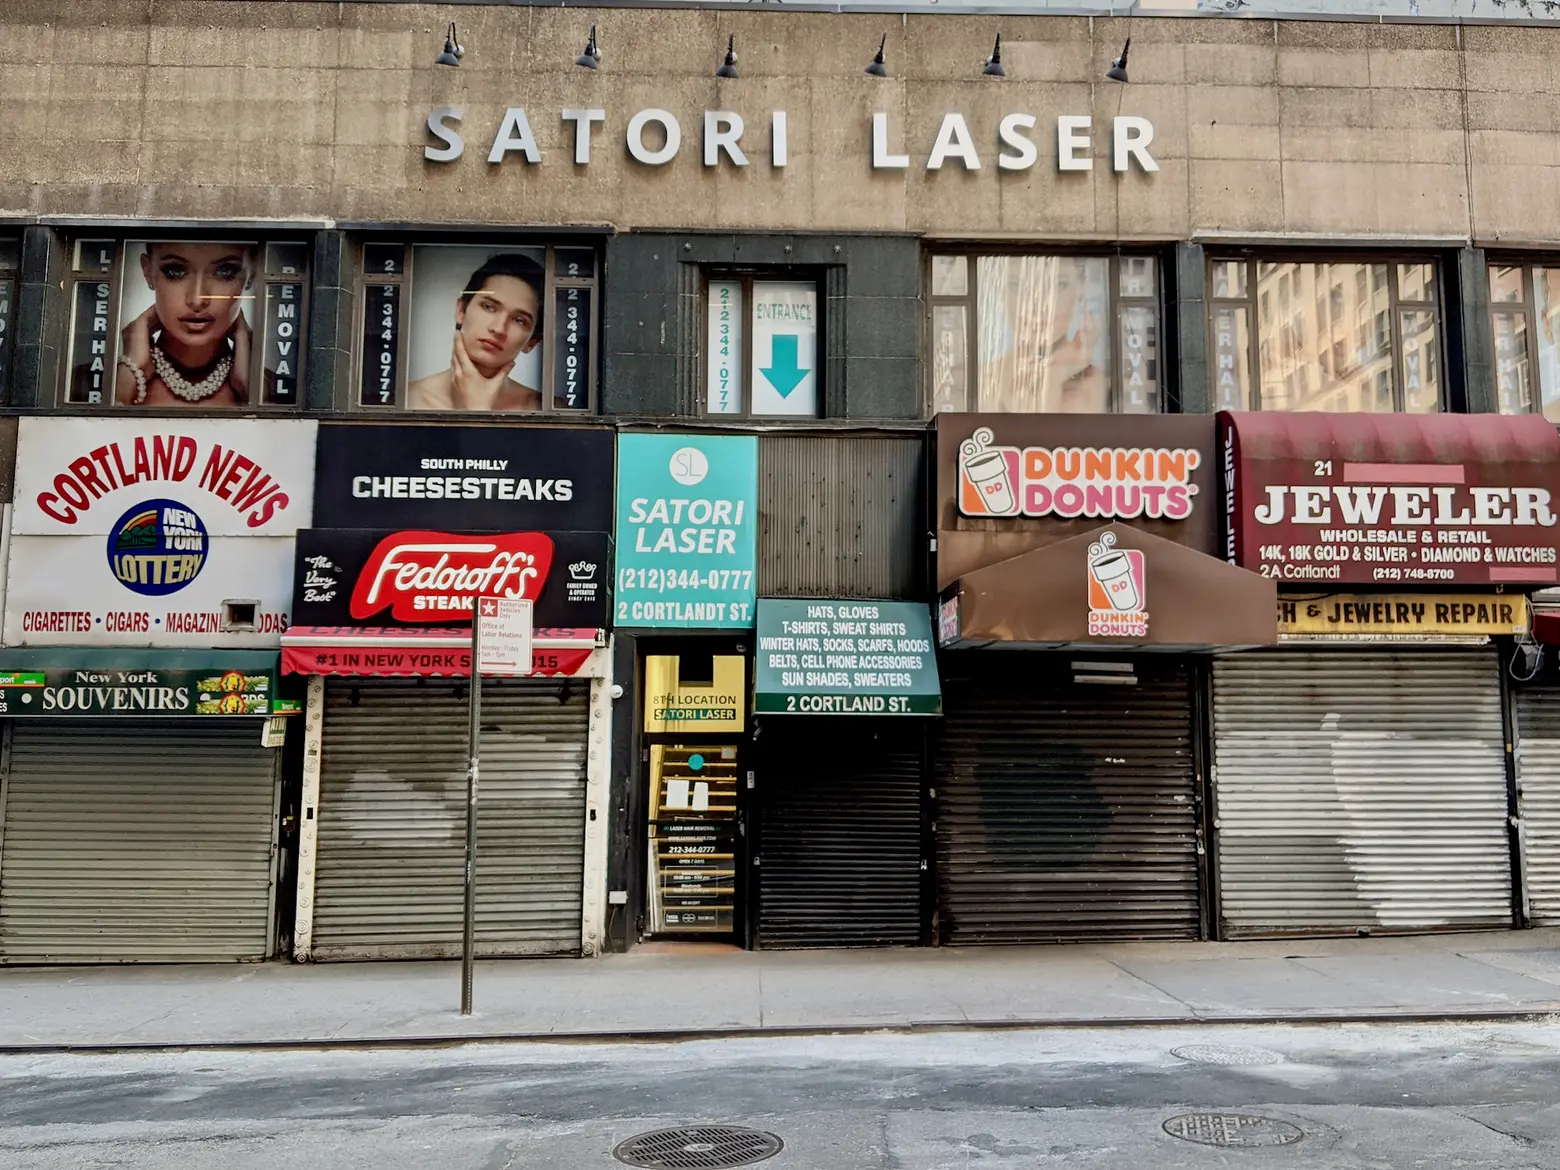 Since March, thousands of small businesses in NYC have closed for good